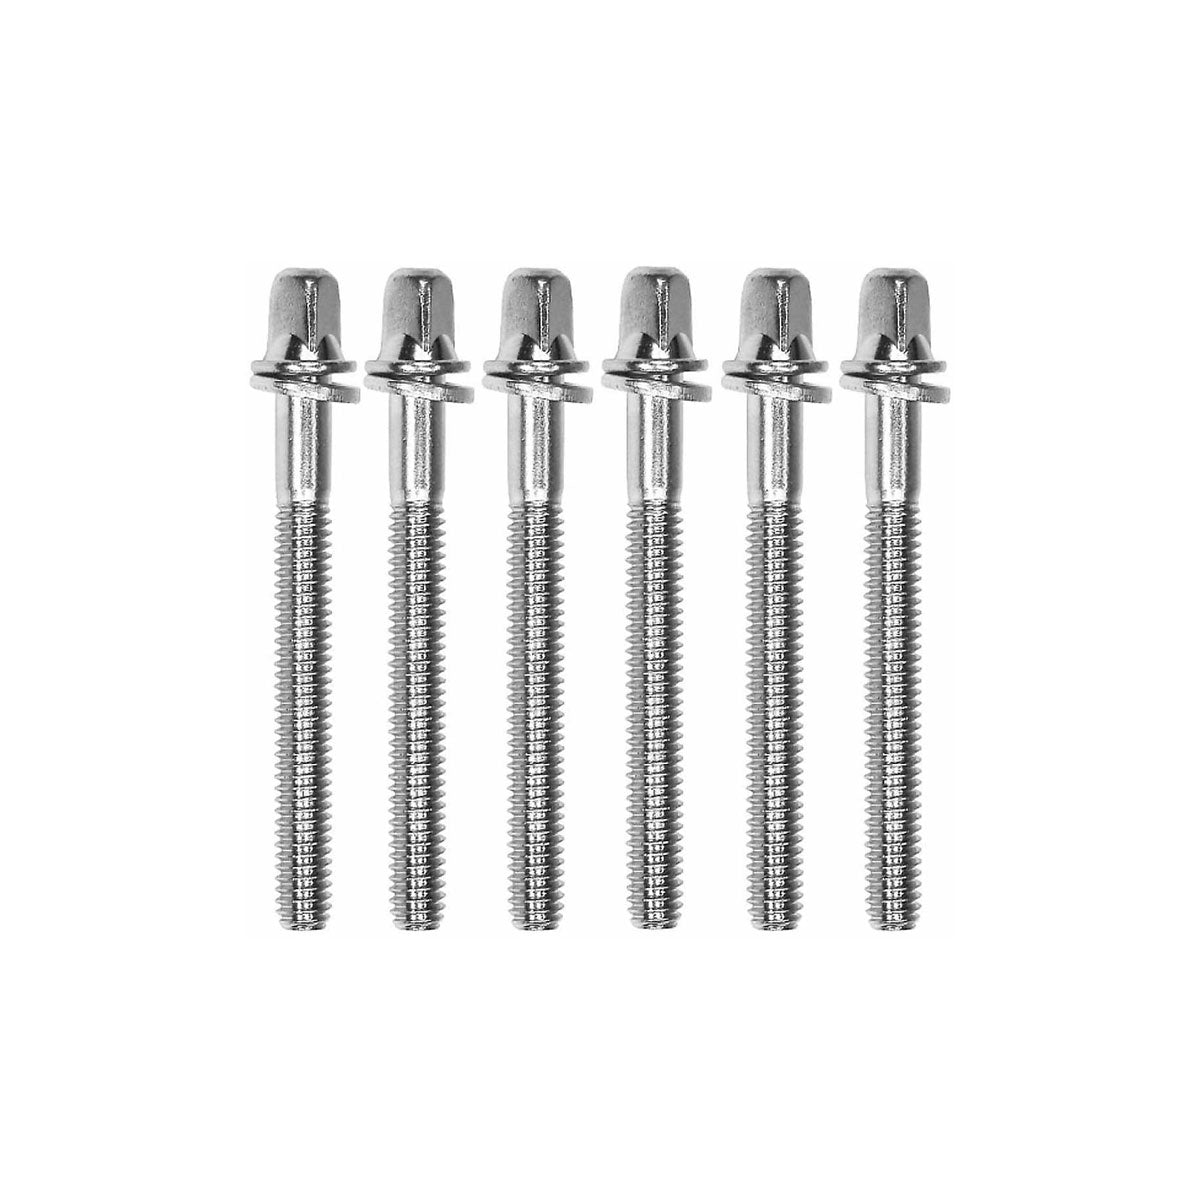 Pearl T-055/6 Tension Rods - 6 pack